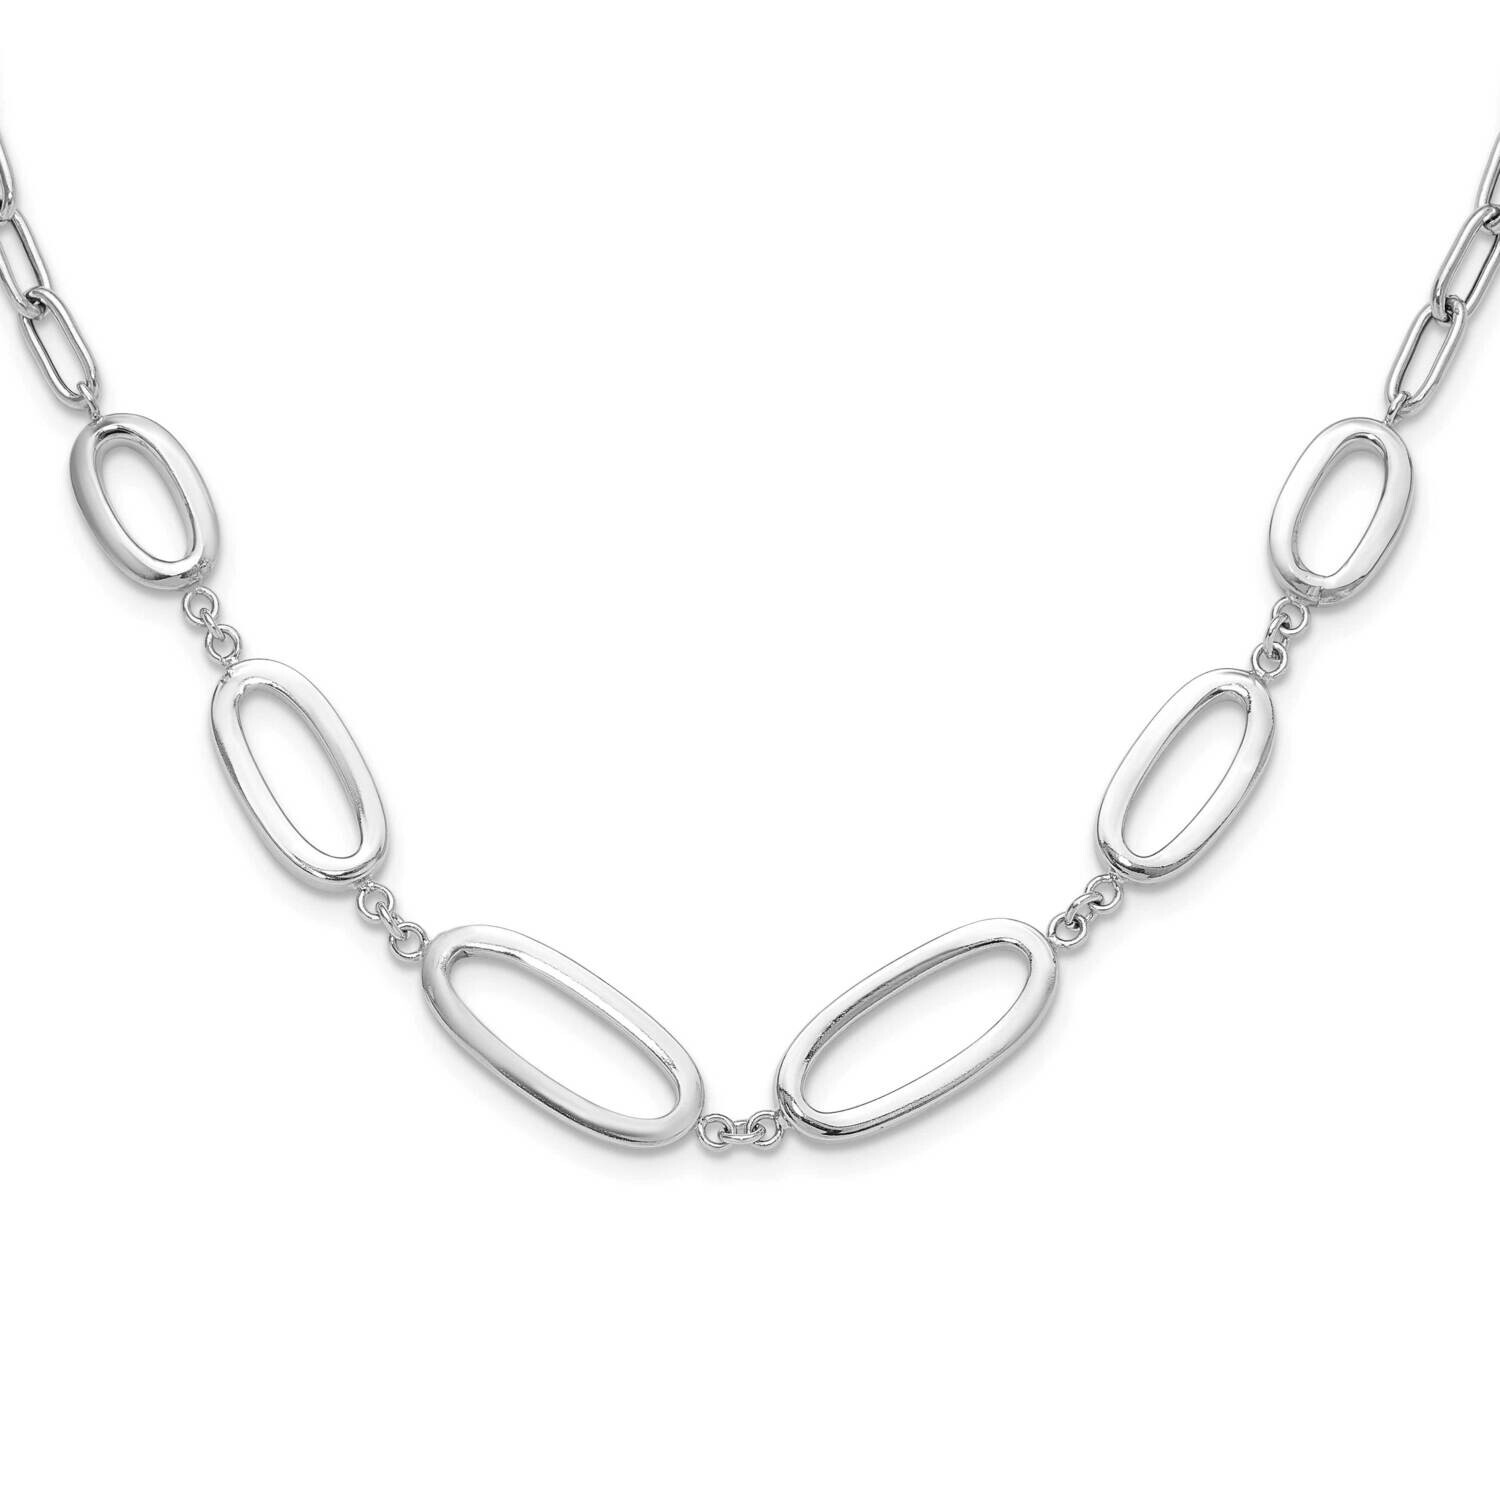 Fancy Ovals 2 Inch Extender Necklace Sterling Silver Rhodium-Plated QG6529-17